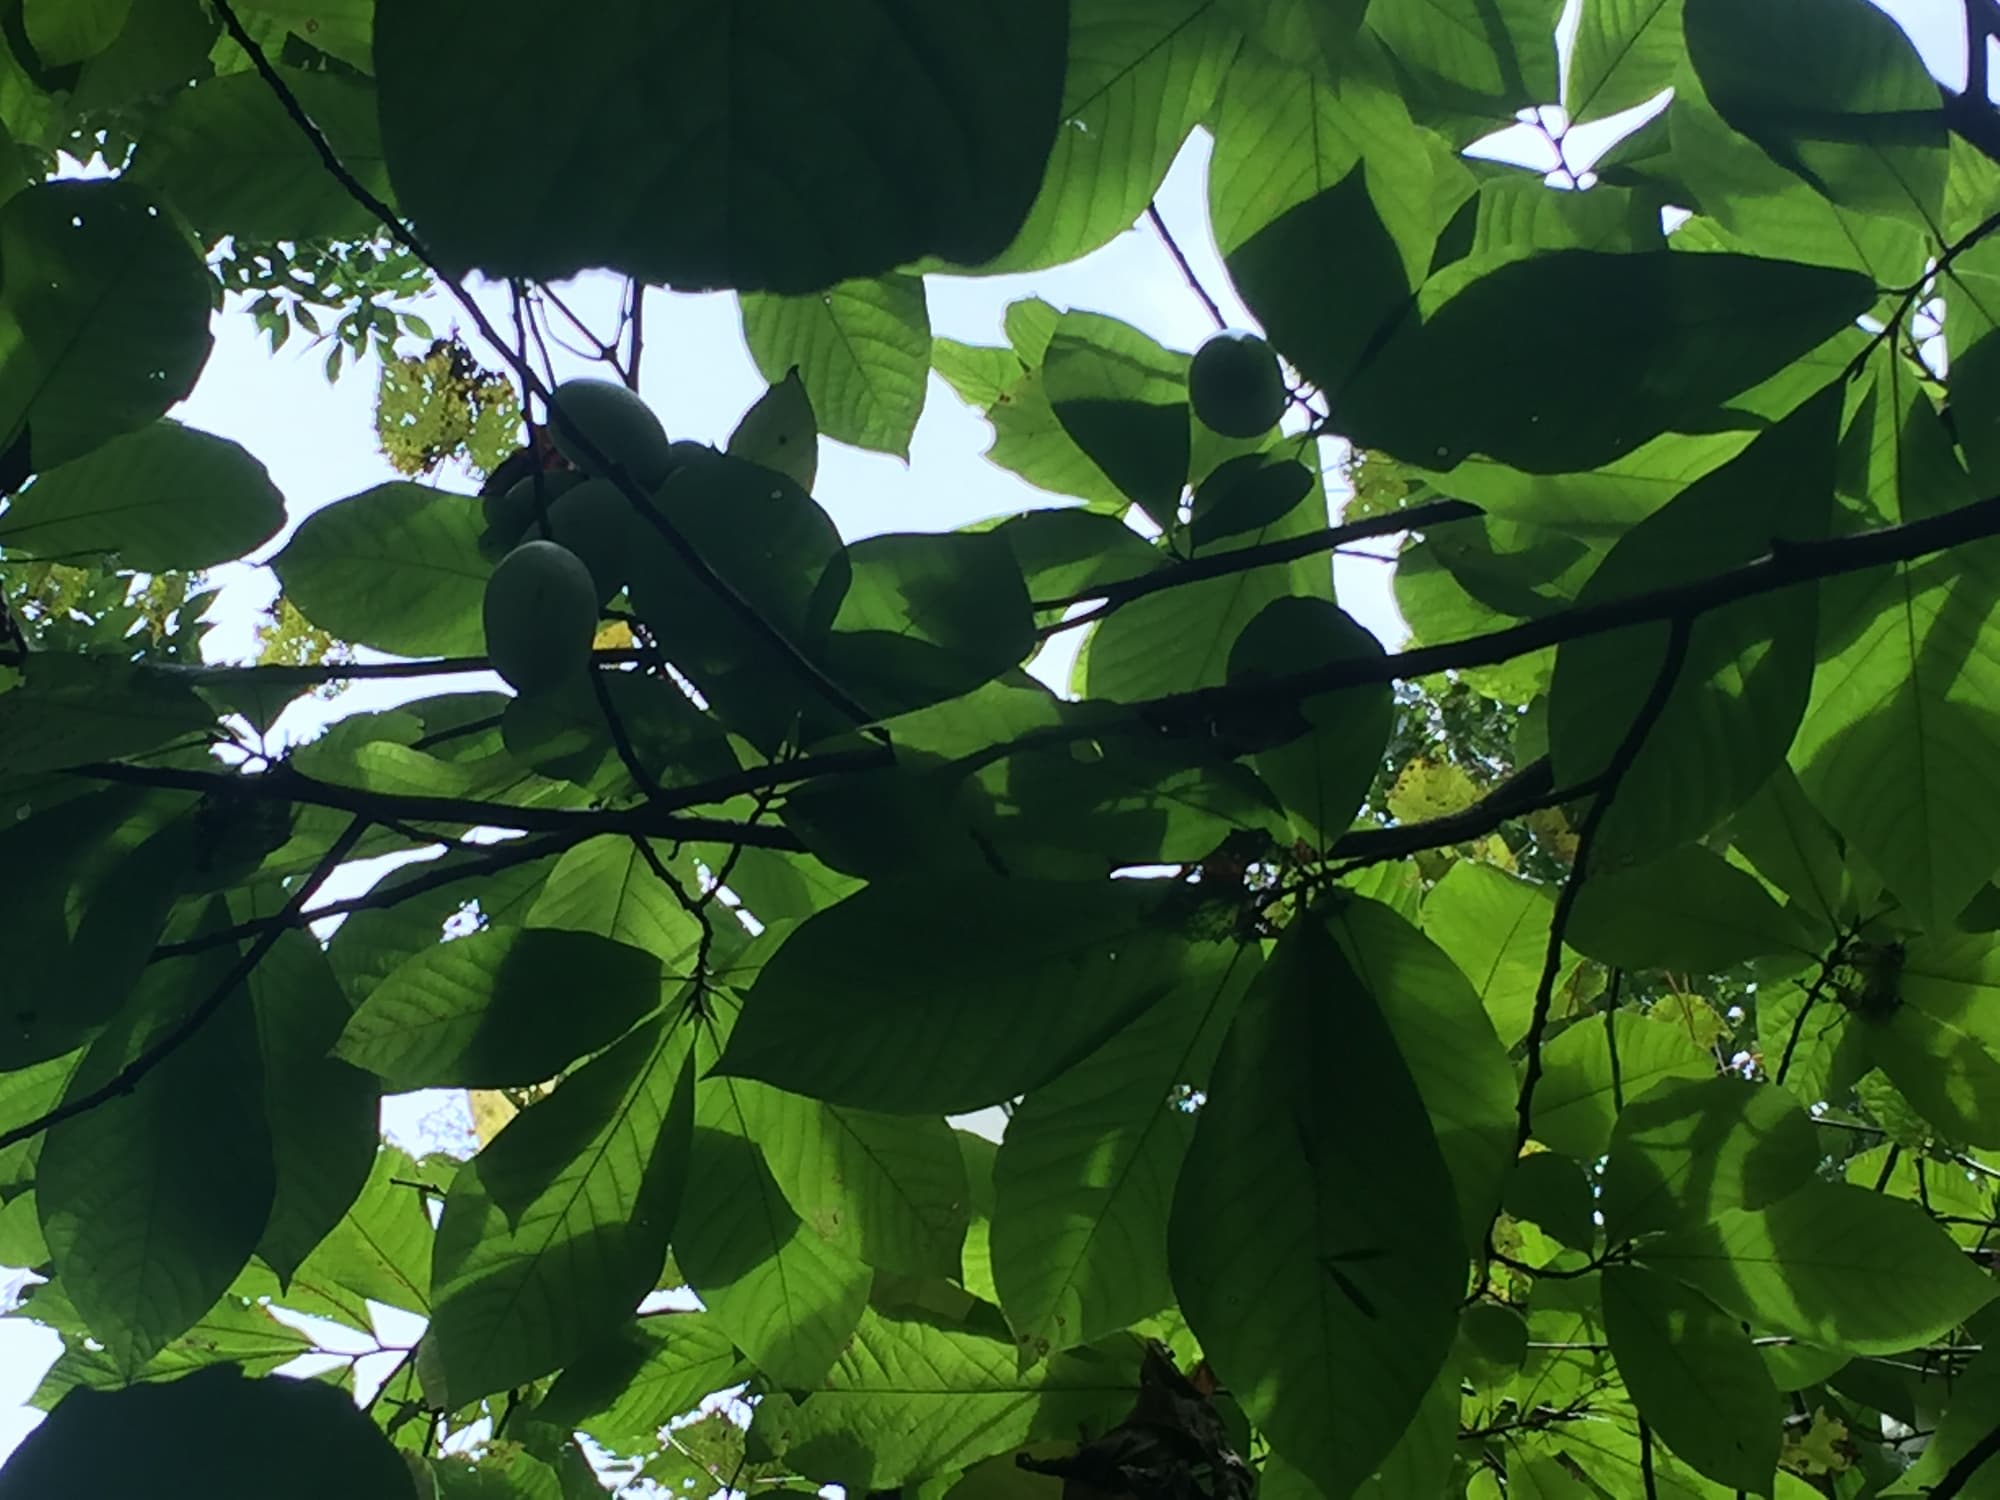 You can easily overlook a productive pawpaw tree because the fruits do not stand out among the leaves. Can you spot the fruits in this photo?